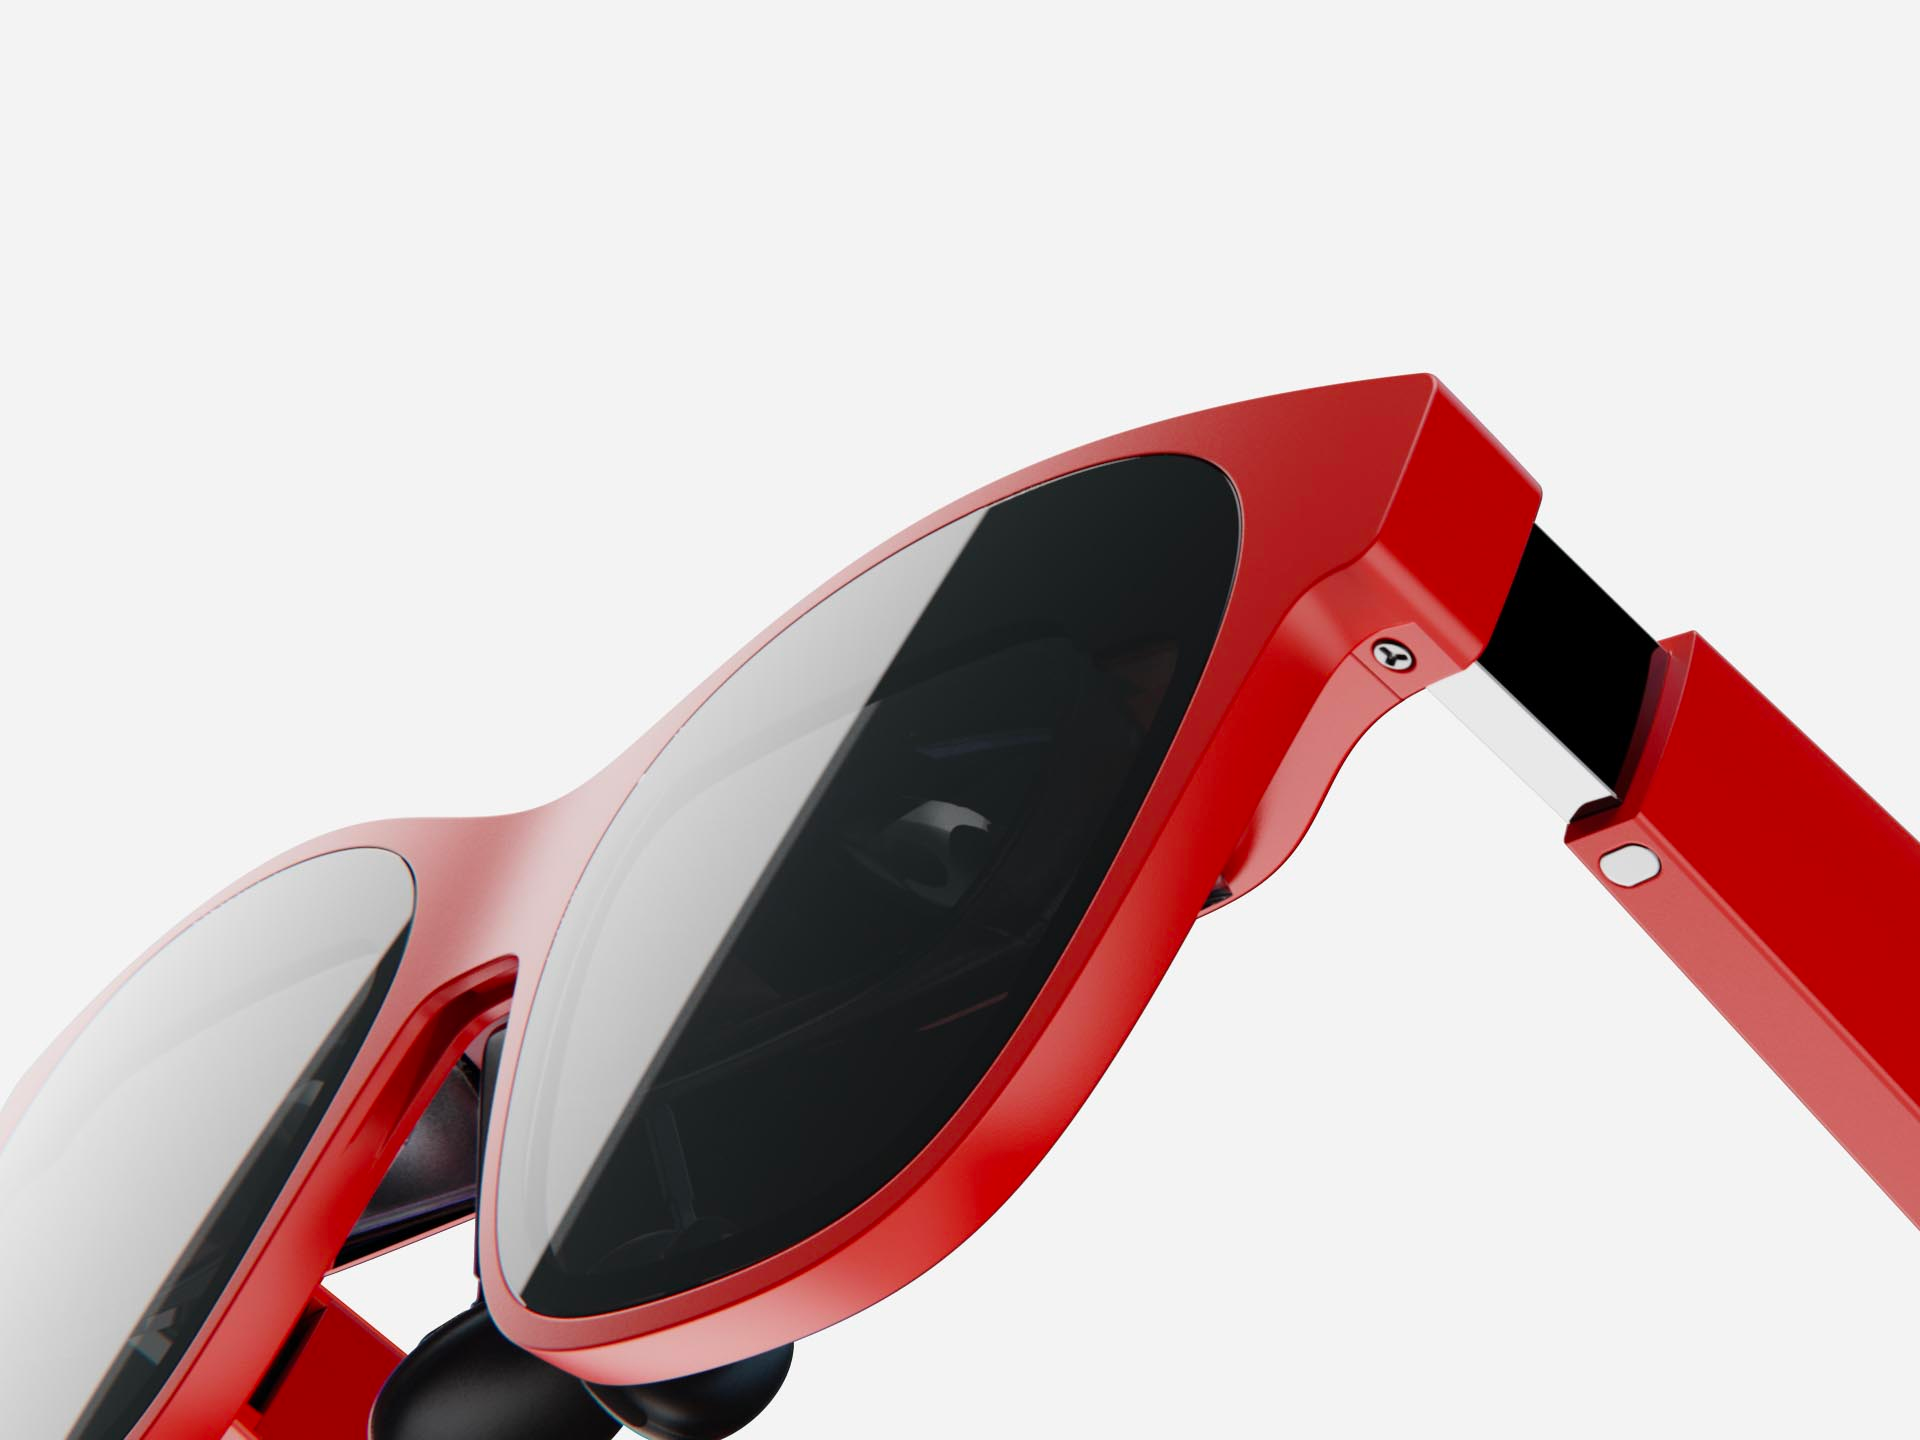 Xreal Air 2 and Air 2 Pro AR glasses are now on pre-order, coming